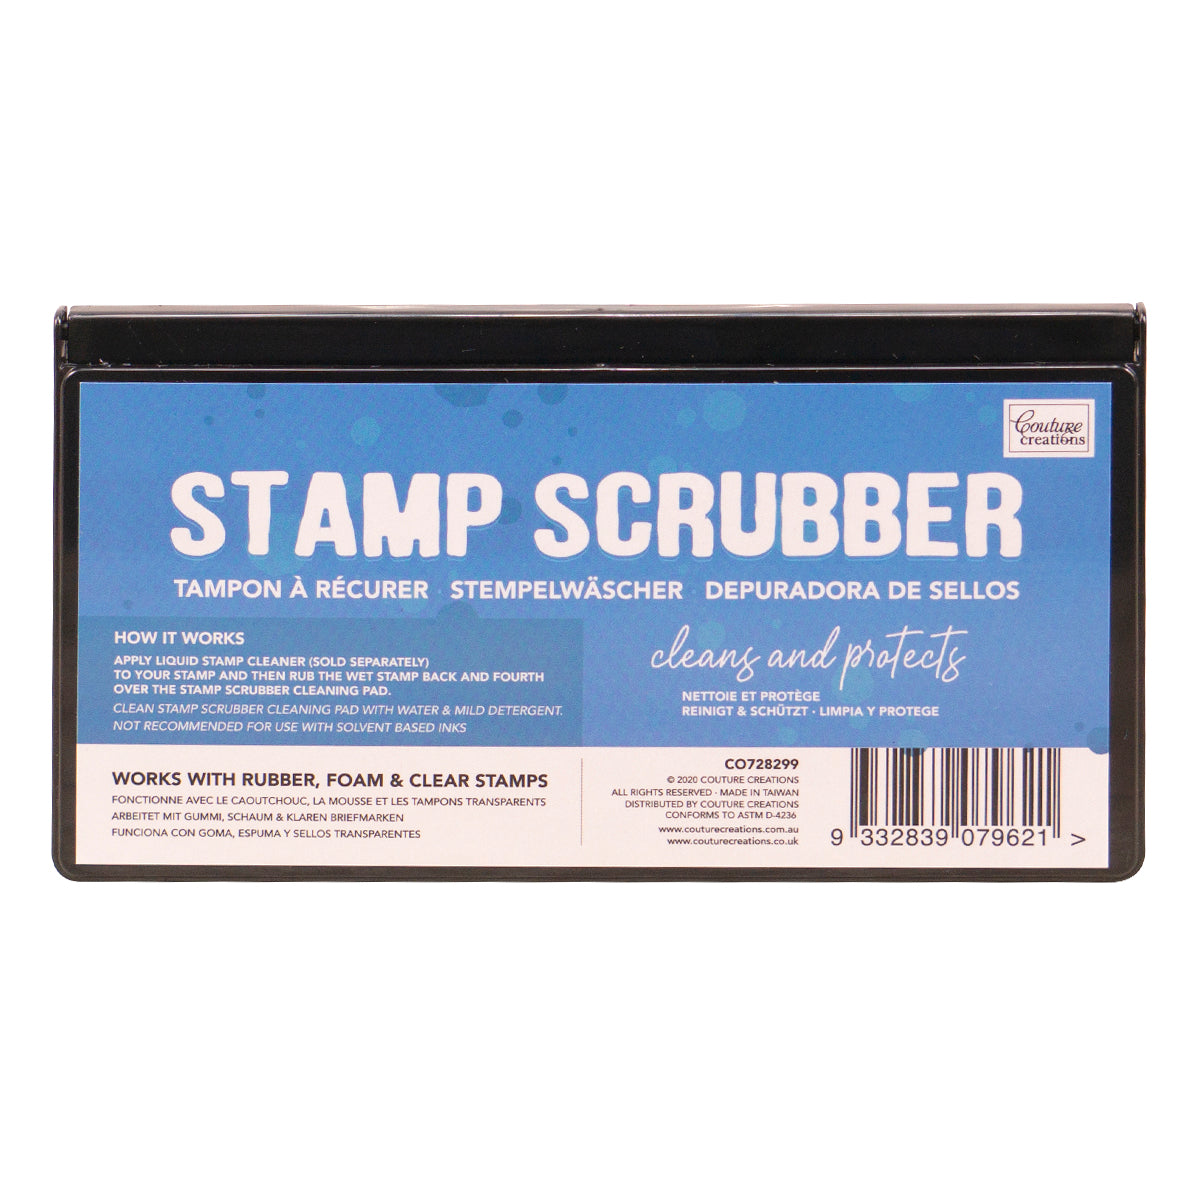 Stamp Scrubber - washable Arts & Crafts Couture Creations